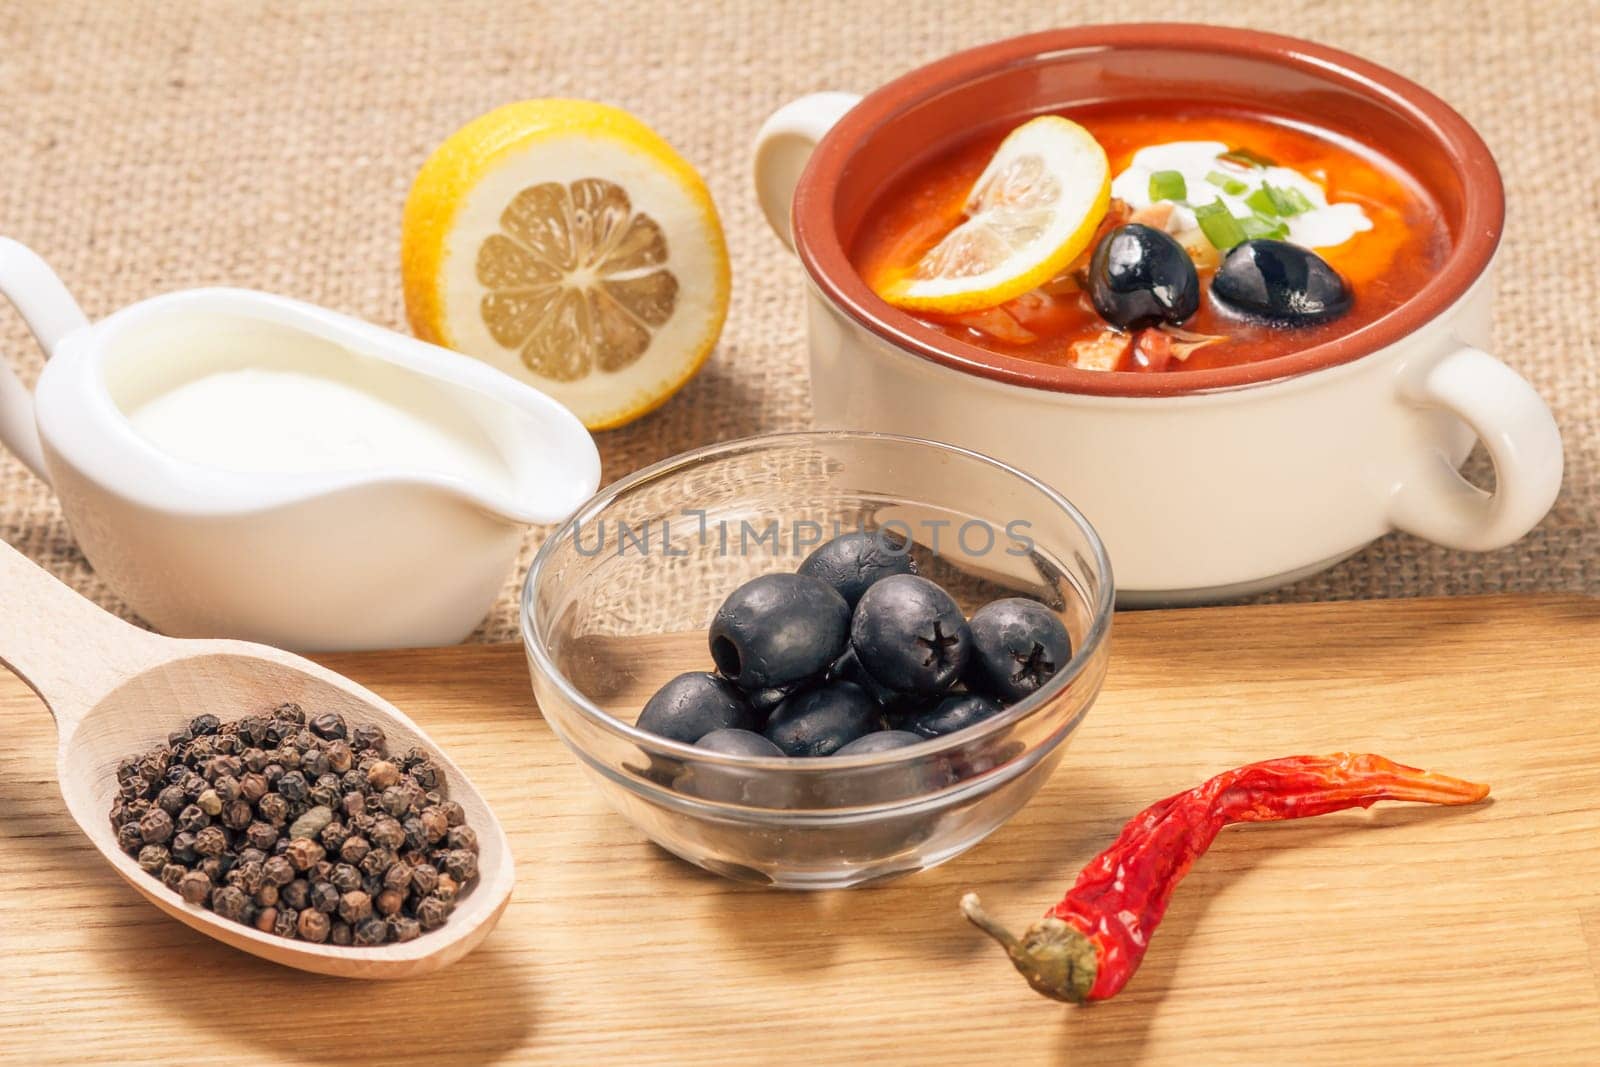 Wooden spoon with black peppercorn, glass bowl with olives, dried red pepper on cutting board and ceramic soup bowl with saltwort, sauceboat with sour cream and cut lemon. Top view.